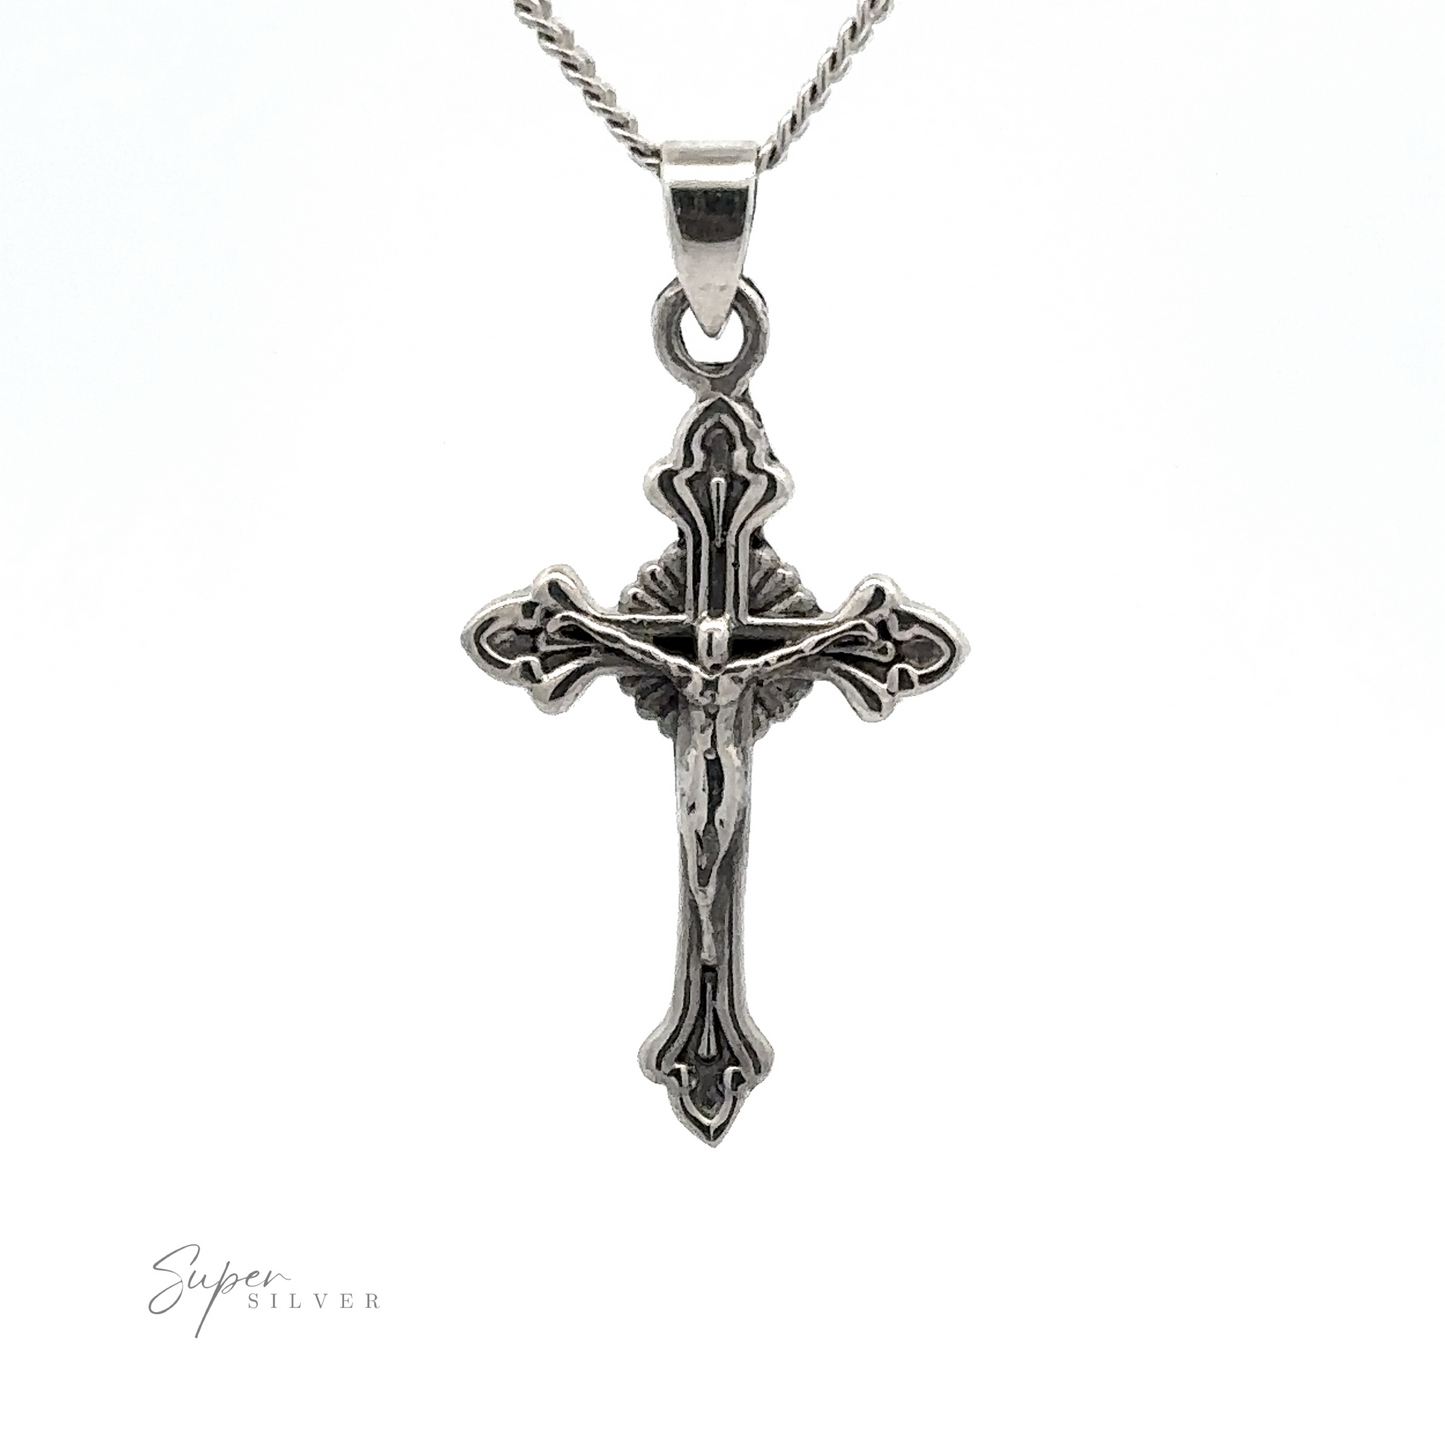 
                  
                    A detailed Crucifix Charm on a chain, with intricate designs and a figure in the center. The background is plain white.
                  
                